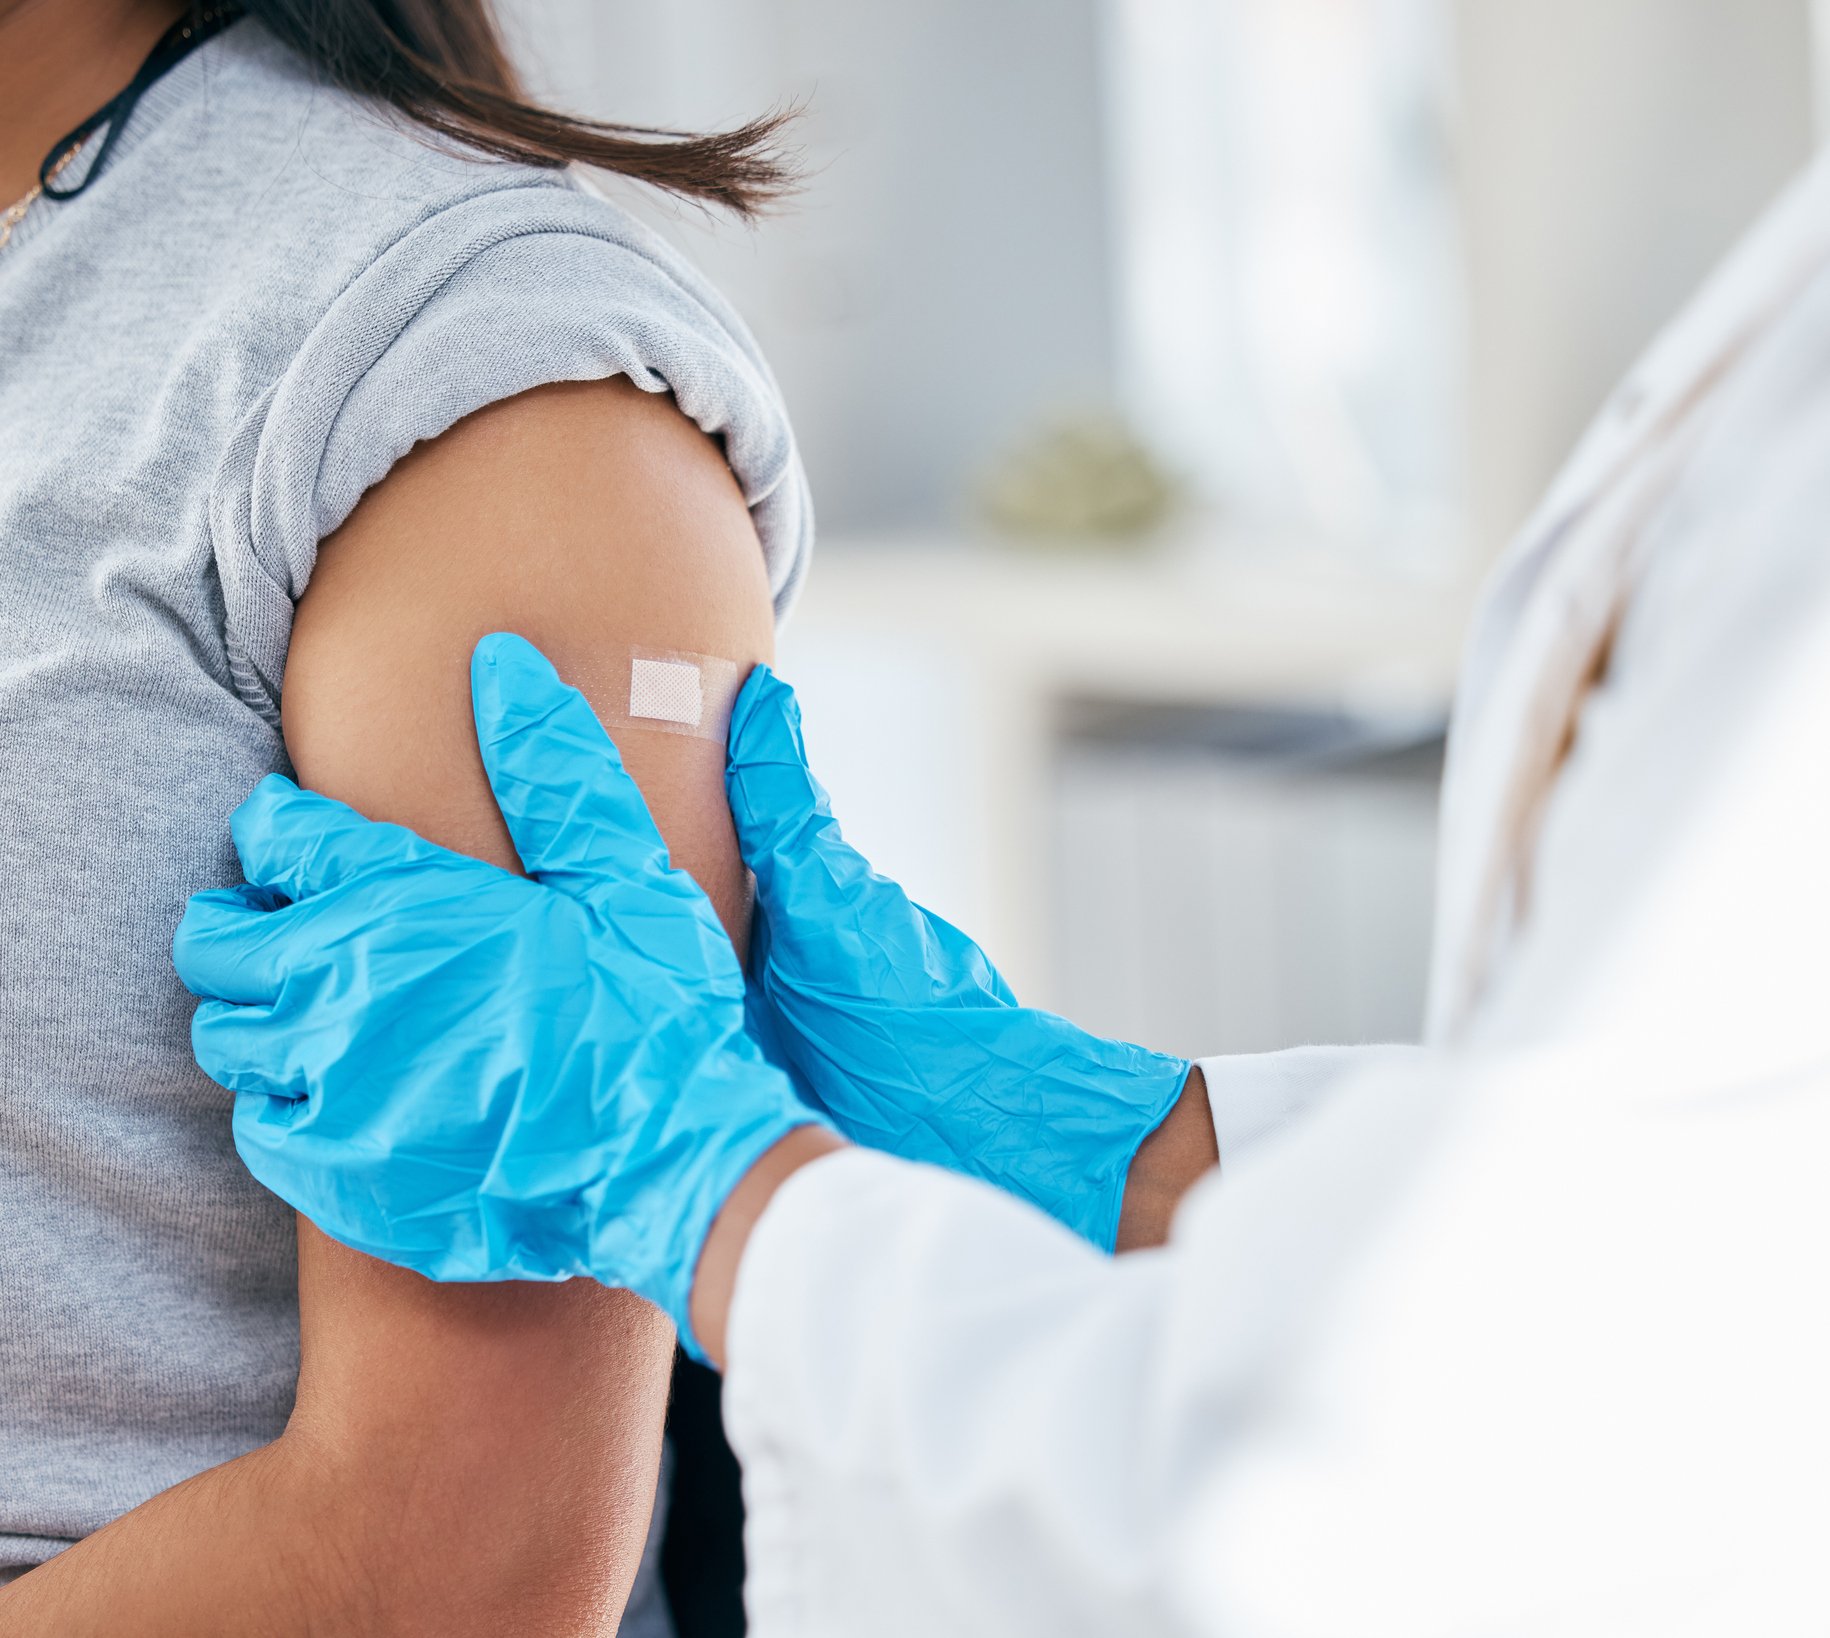 Vaccine shots for preventable diseases 